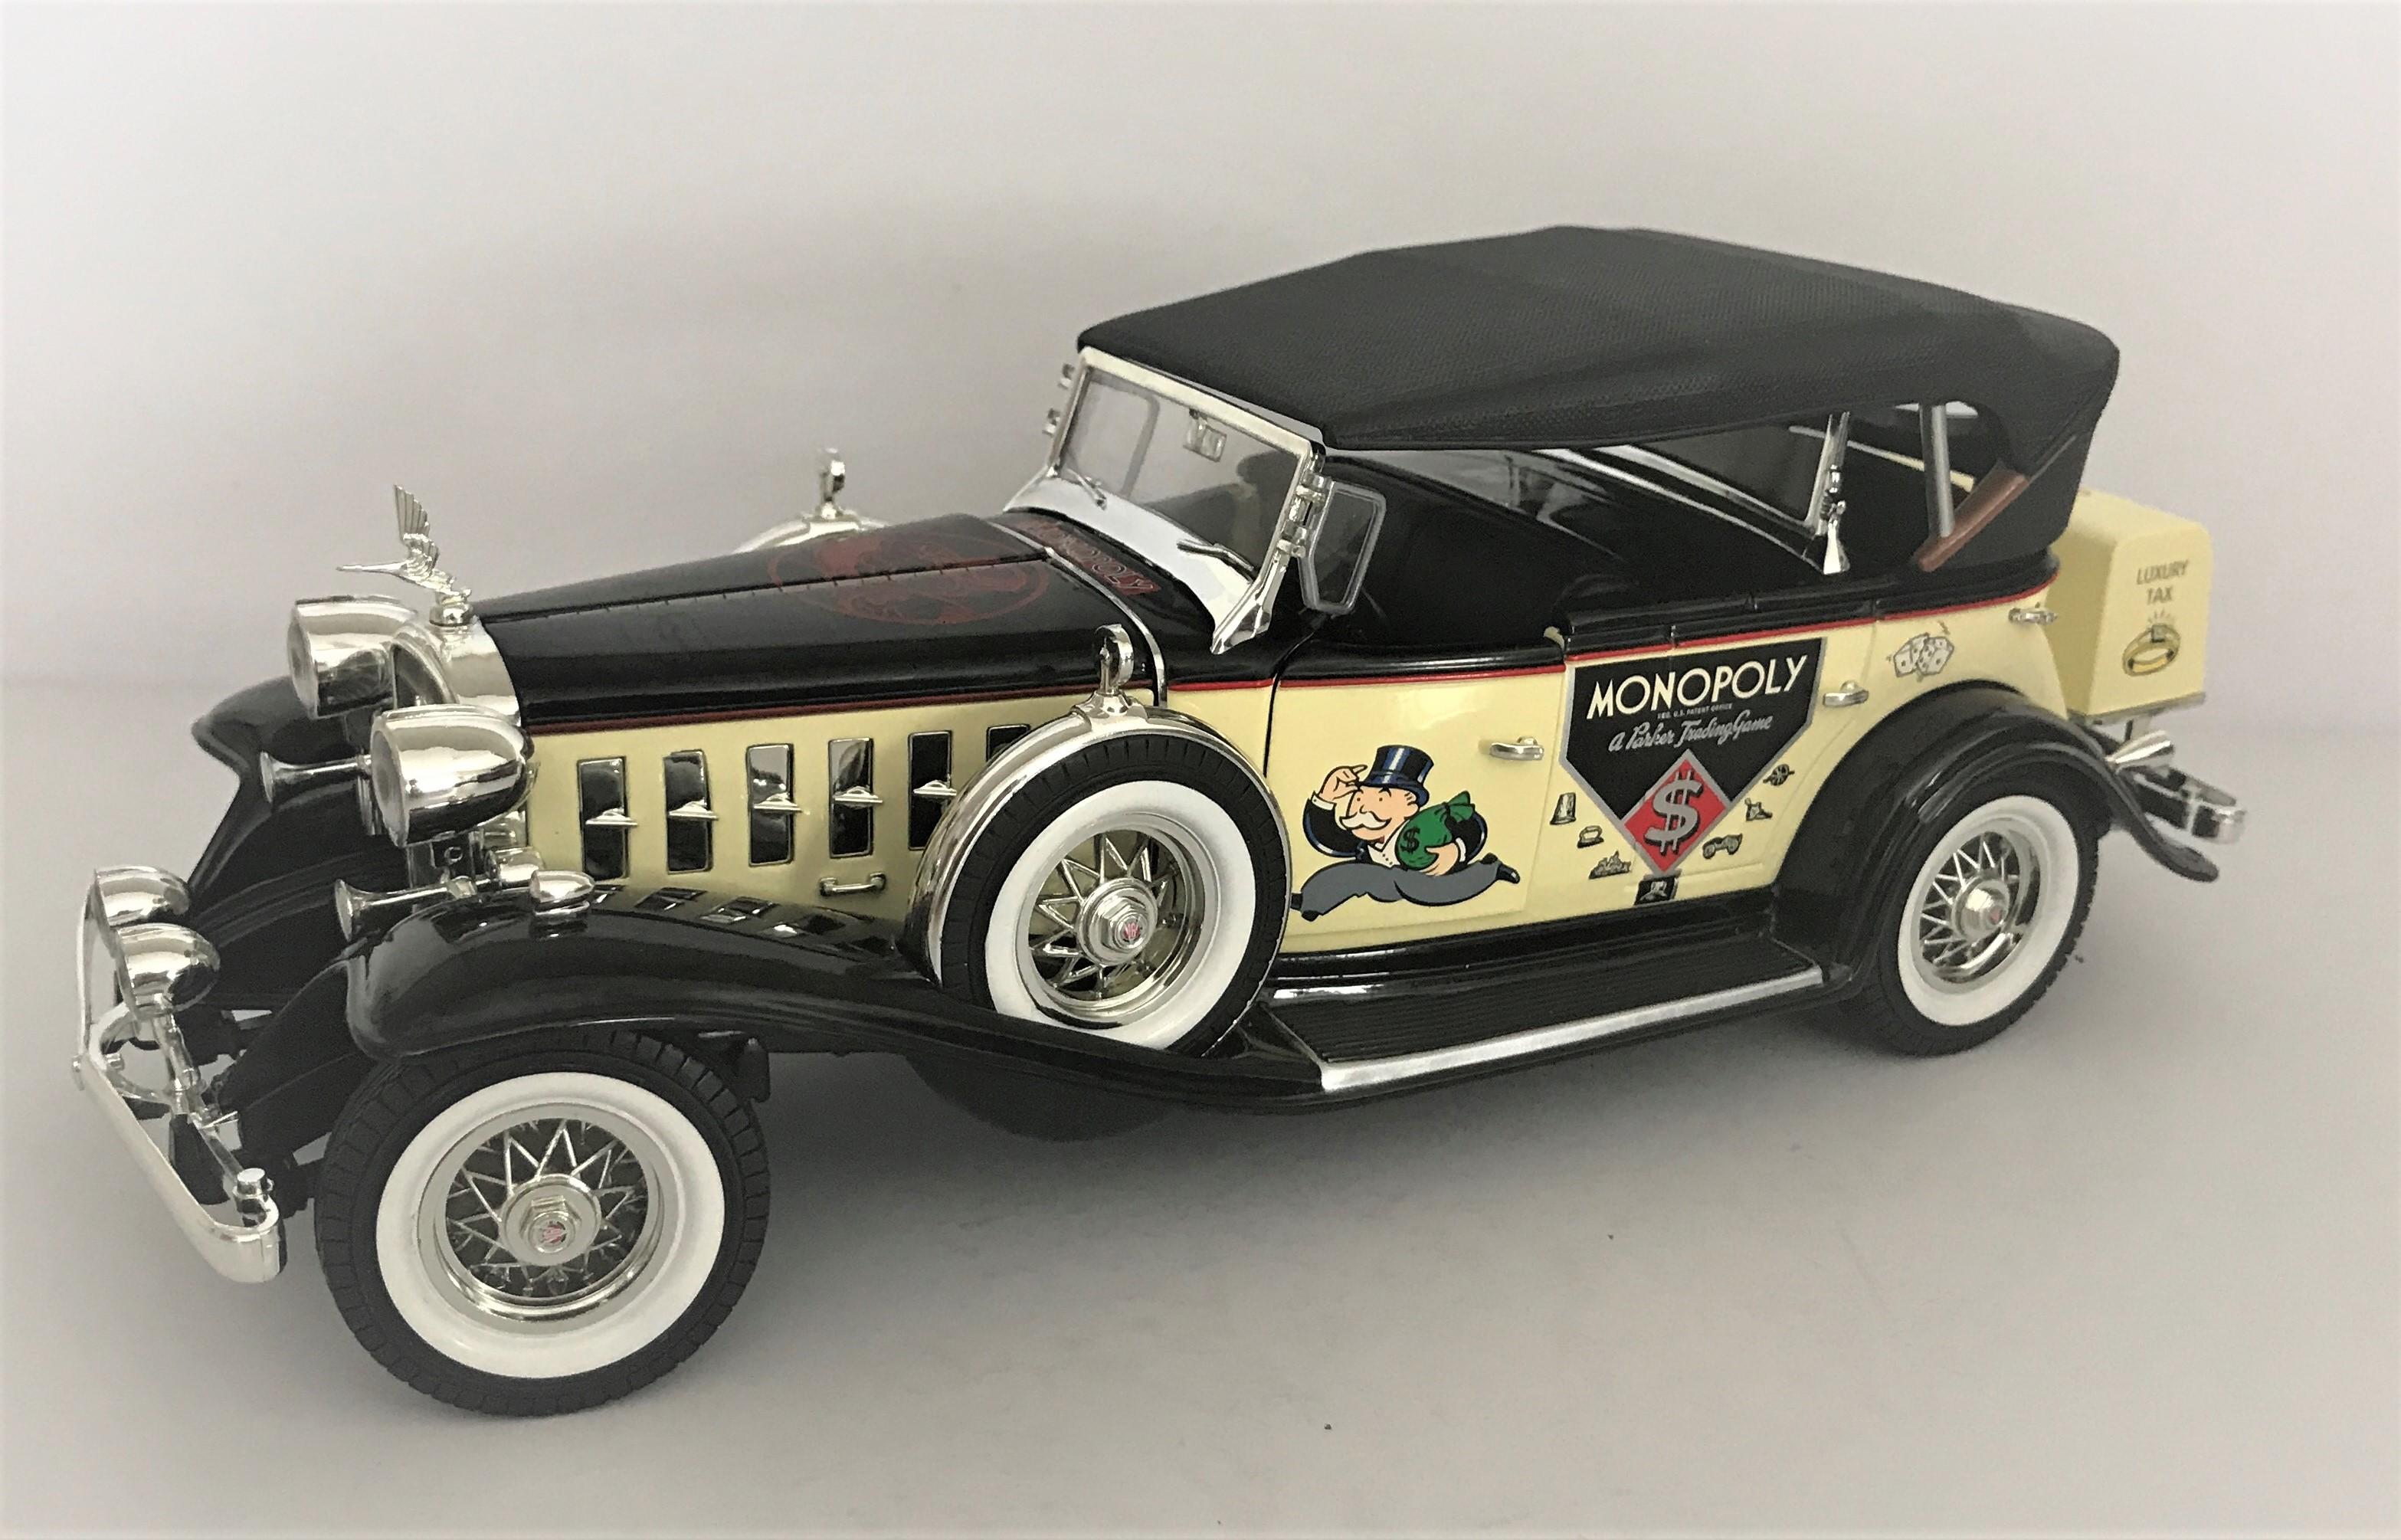 1932 Cadillac V16 Sports Phaeton Mr Monopoly With Resin Figure 1:18 Scale Die Cast Metal Model Car